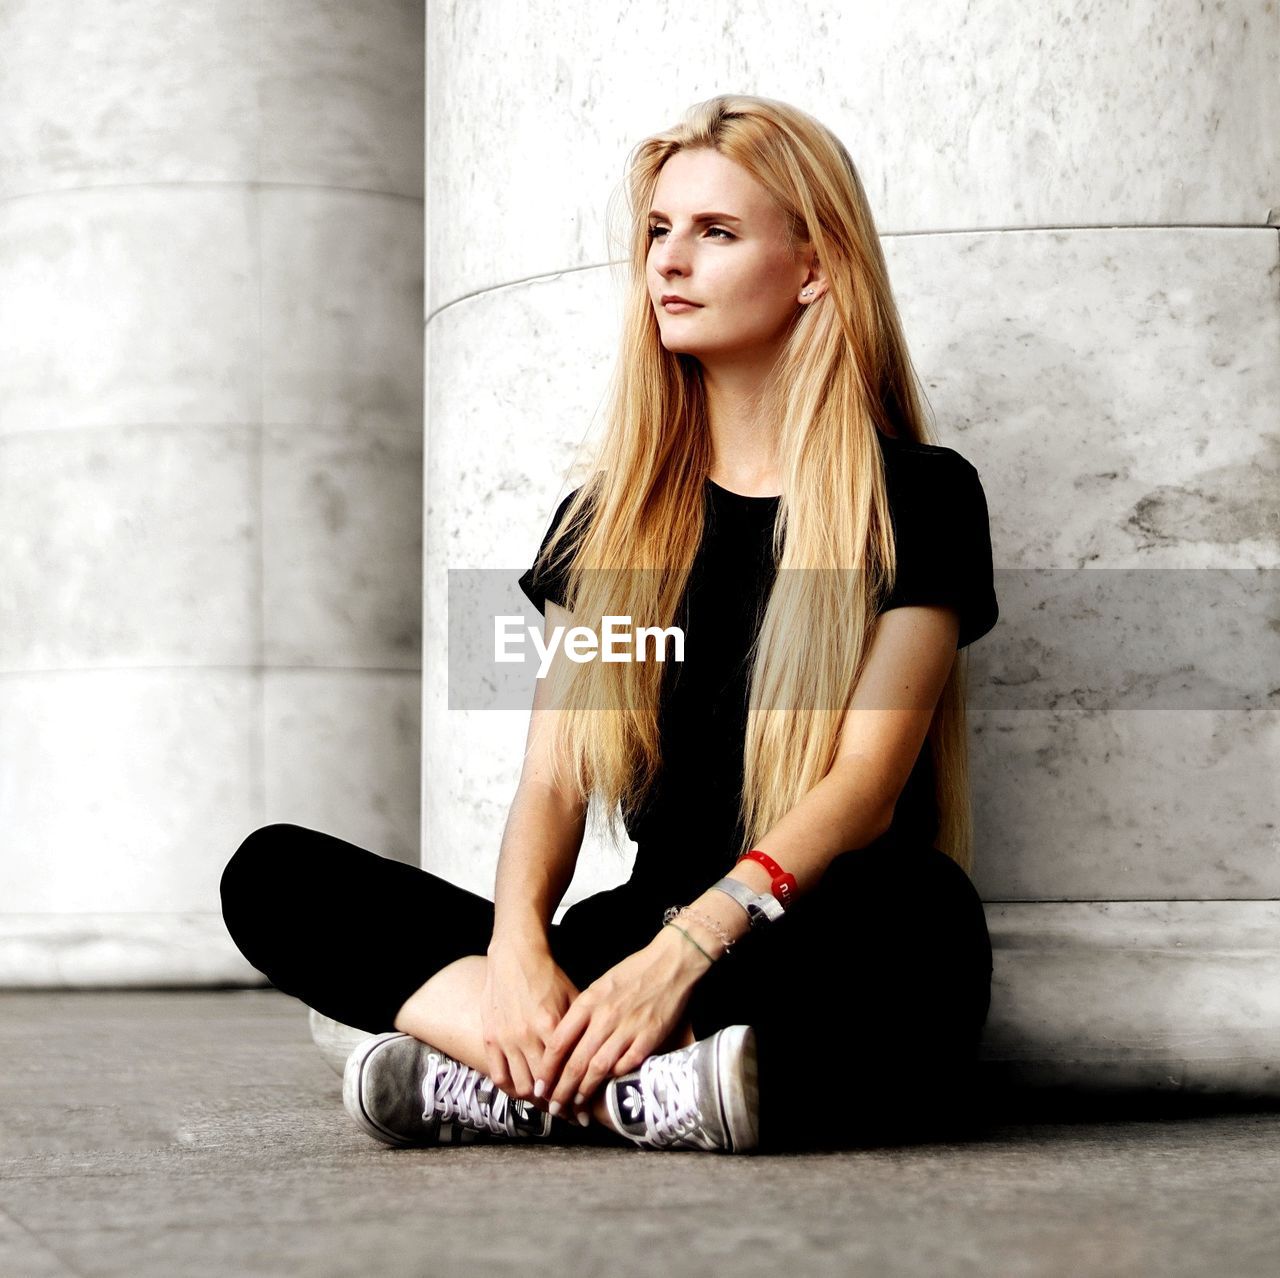 BEAUTIFUL YOUNG WOMAN SITTING AGAINST WALL IN BUILDING